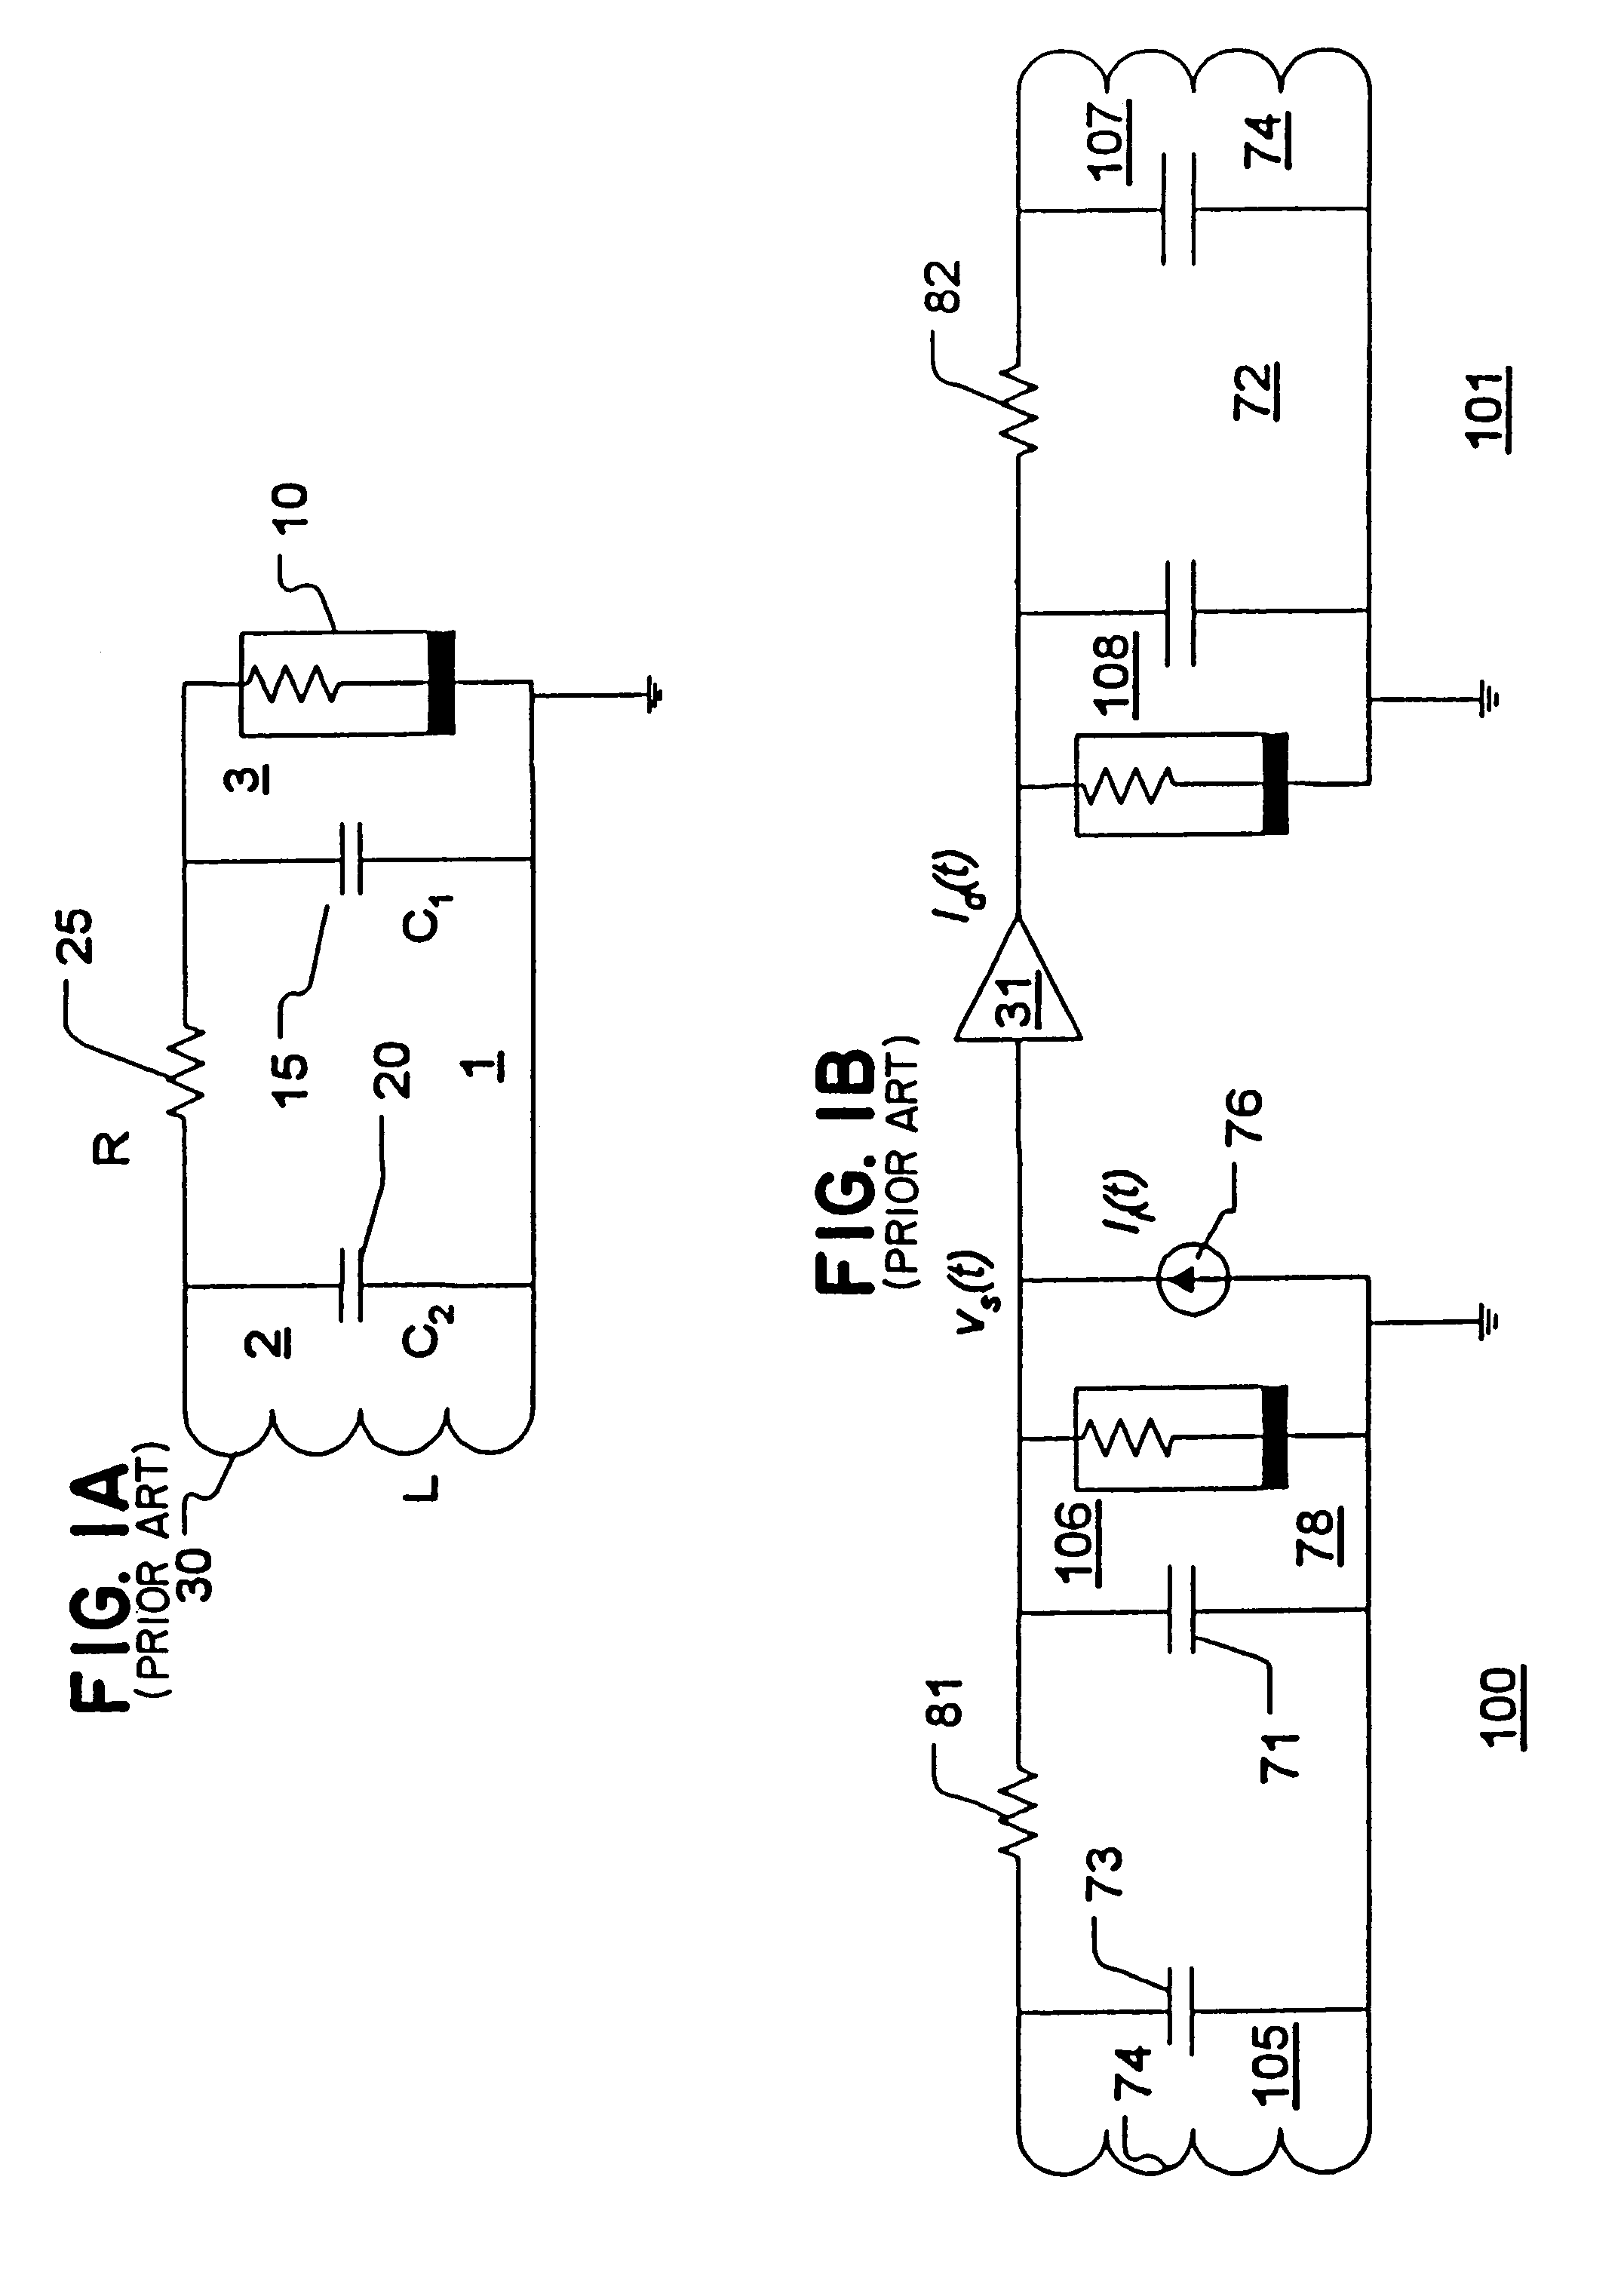 Communications system using chaotic synchronized circuits